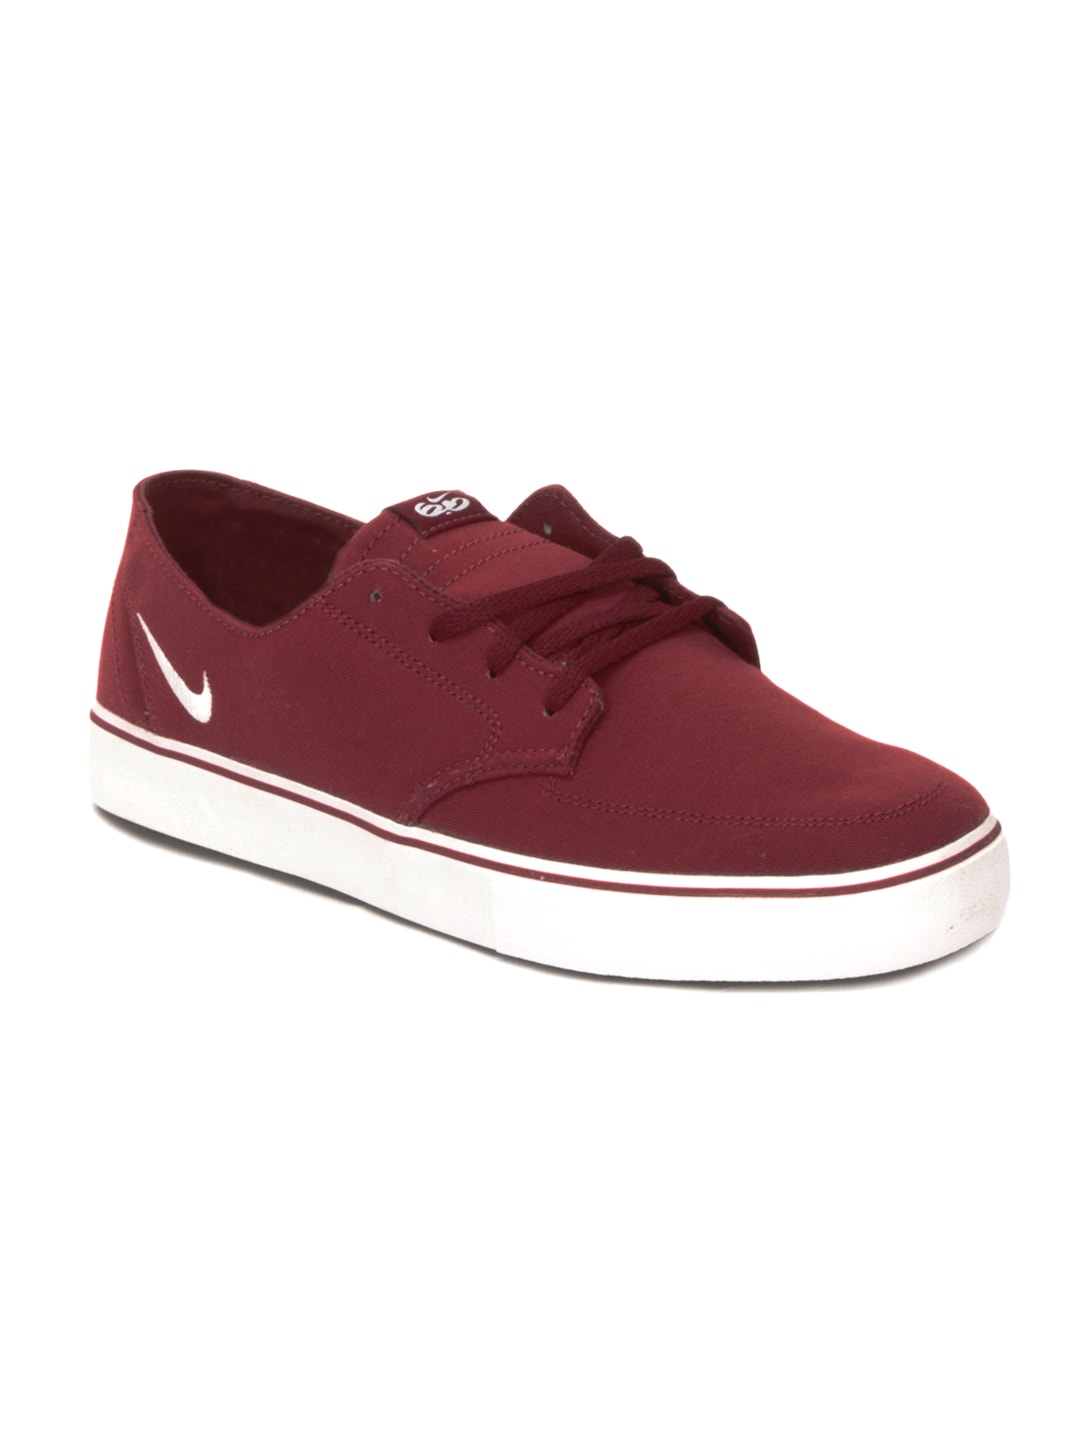 Nike Men Braata Canvas Red Casual Shoes